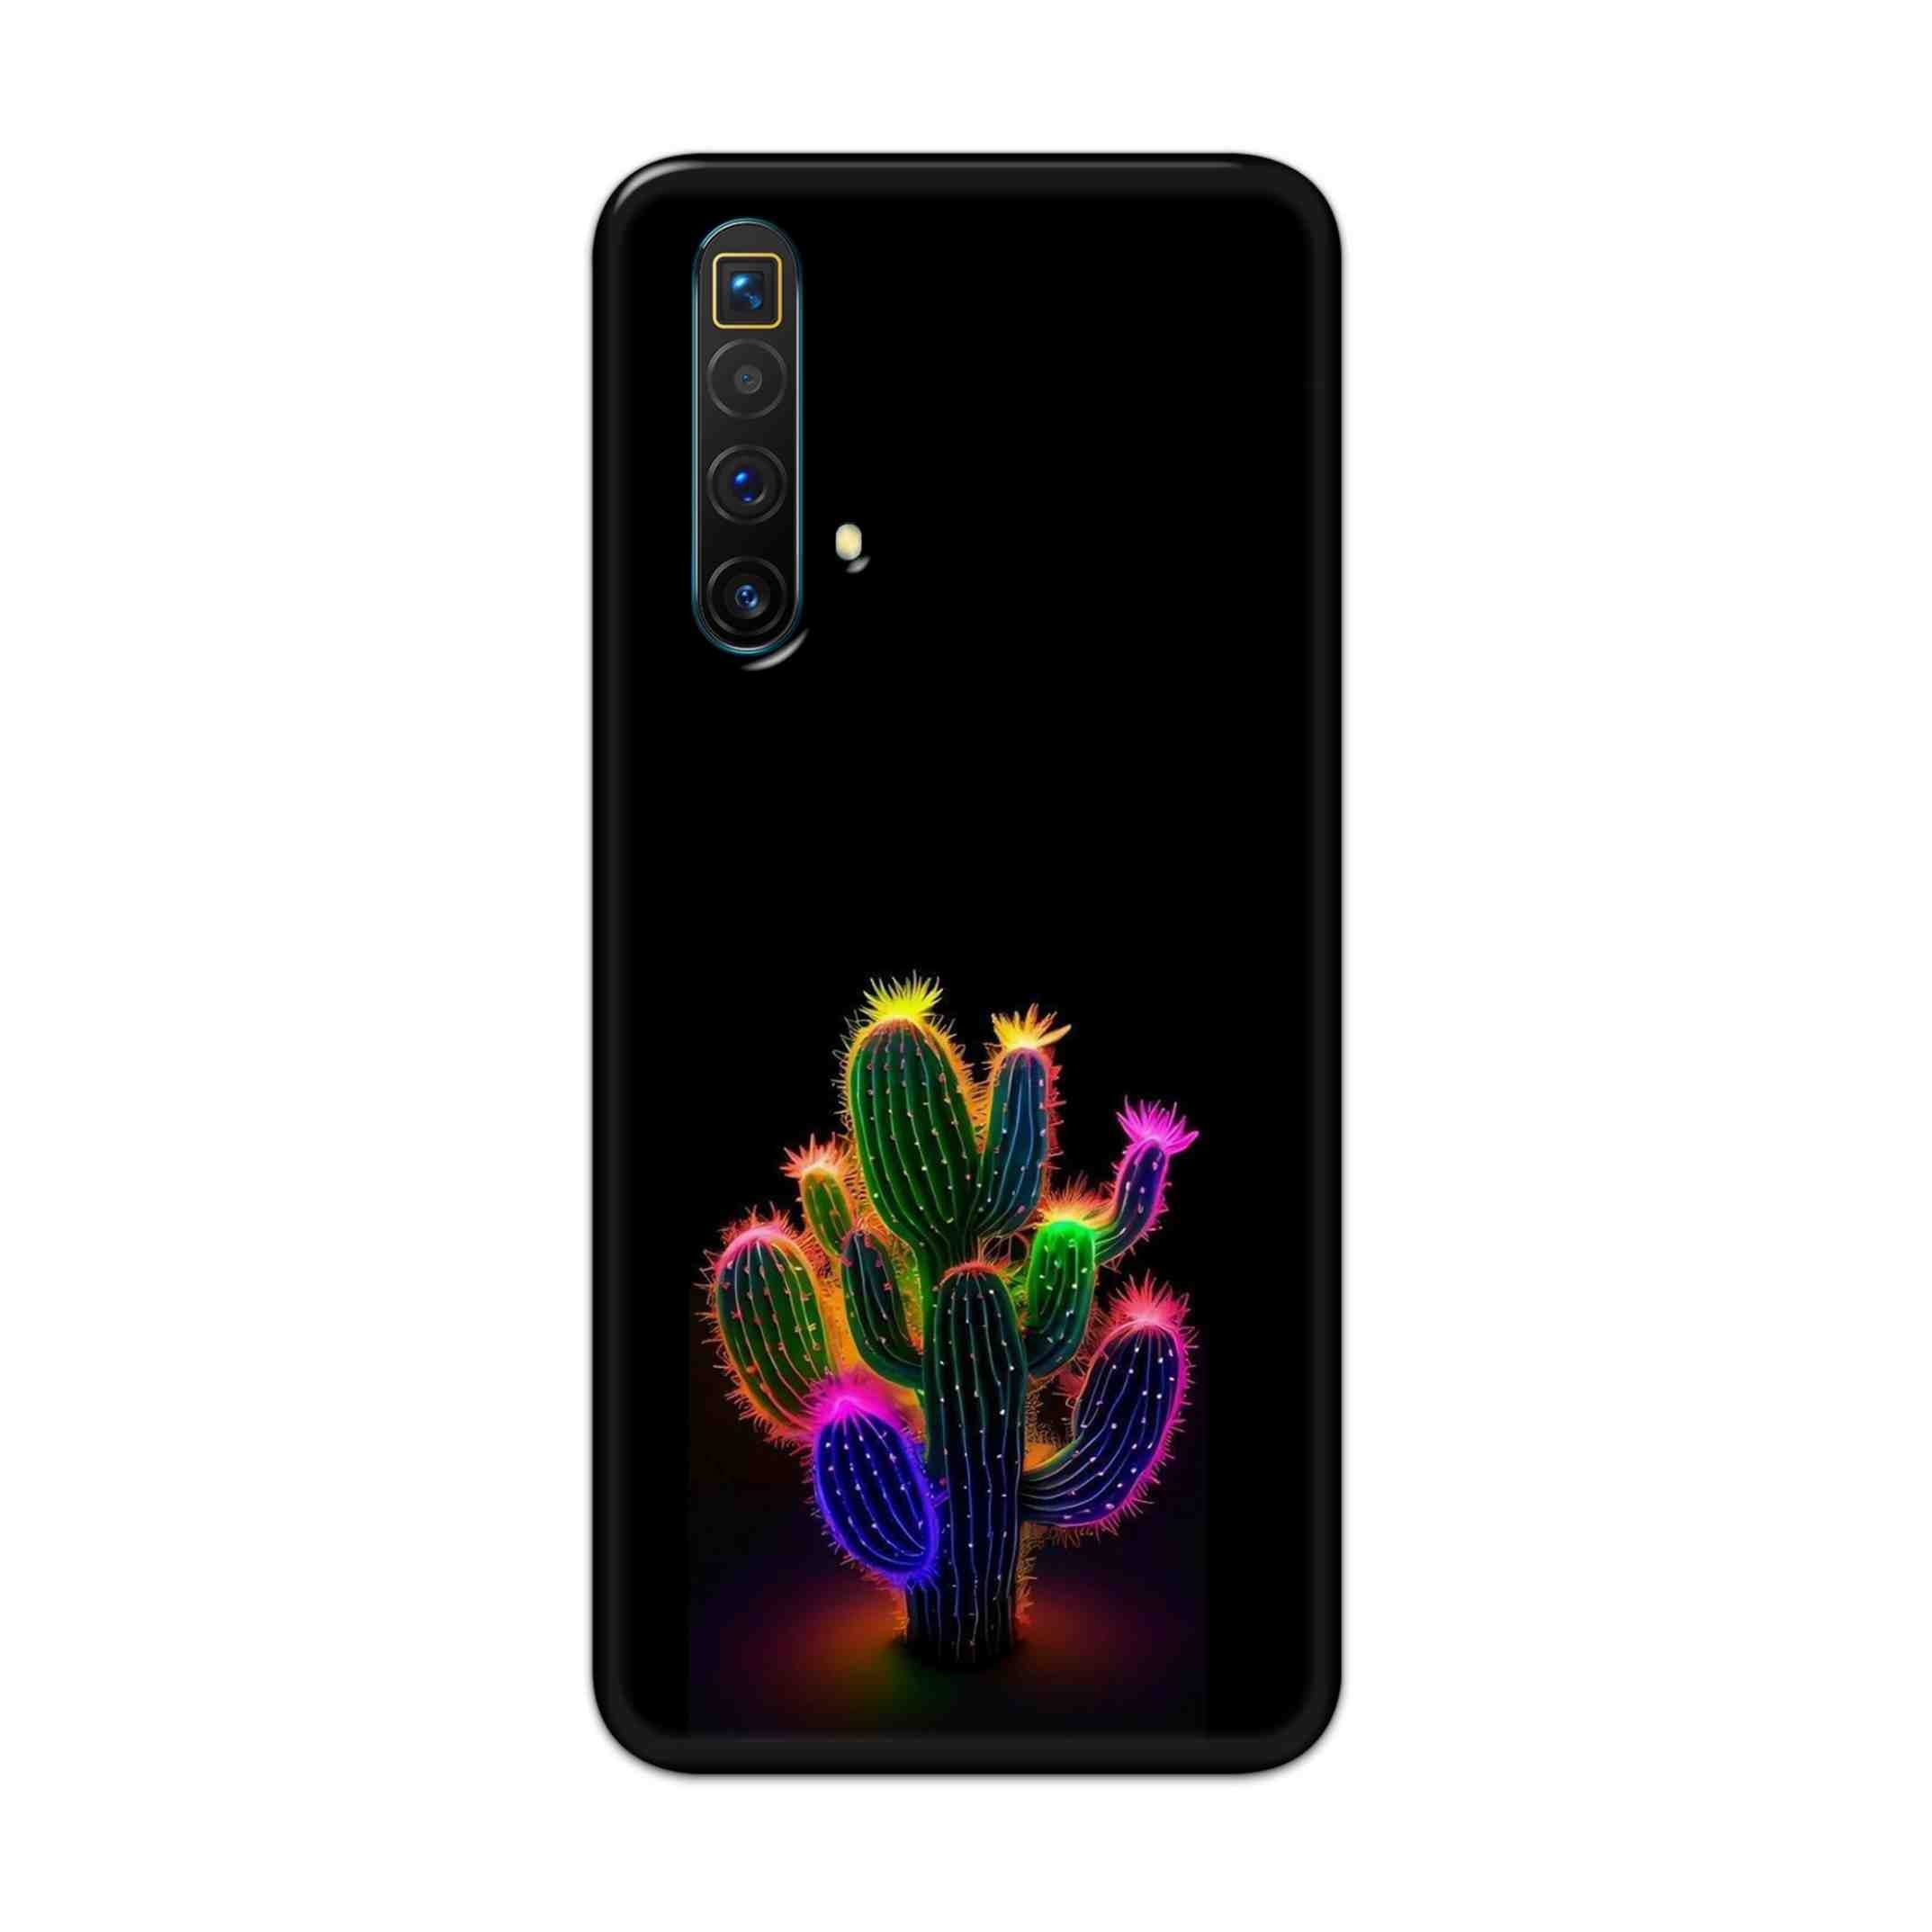 Buy Neon Flower Hard Back Mobile Phone Case Cover For Realme X3 Superzoom Online